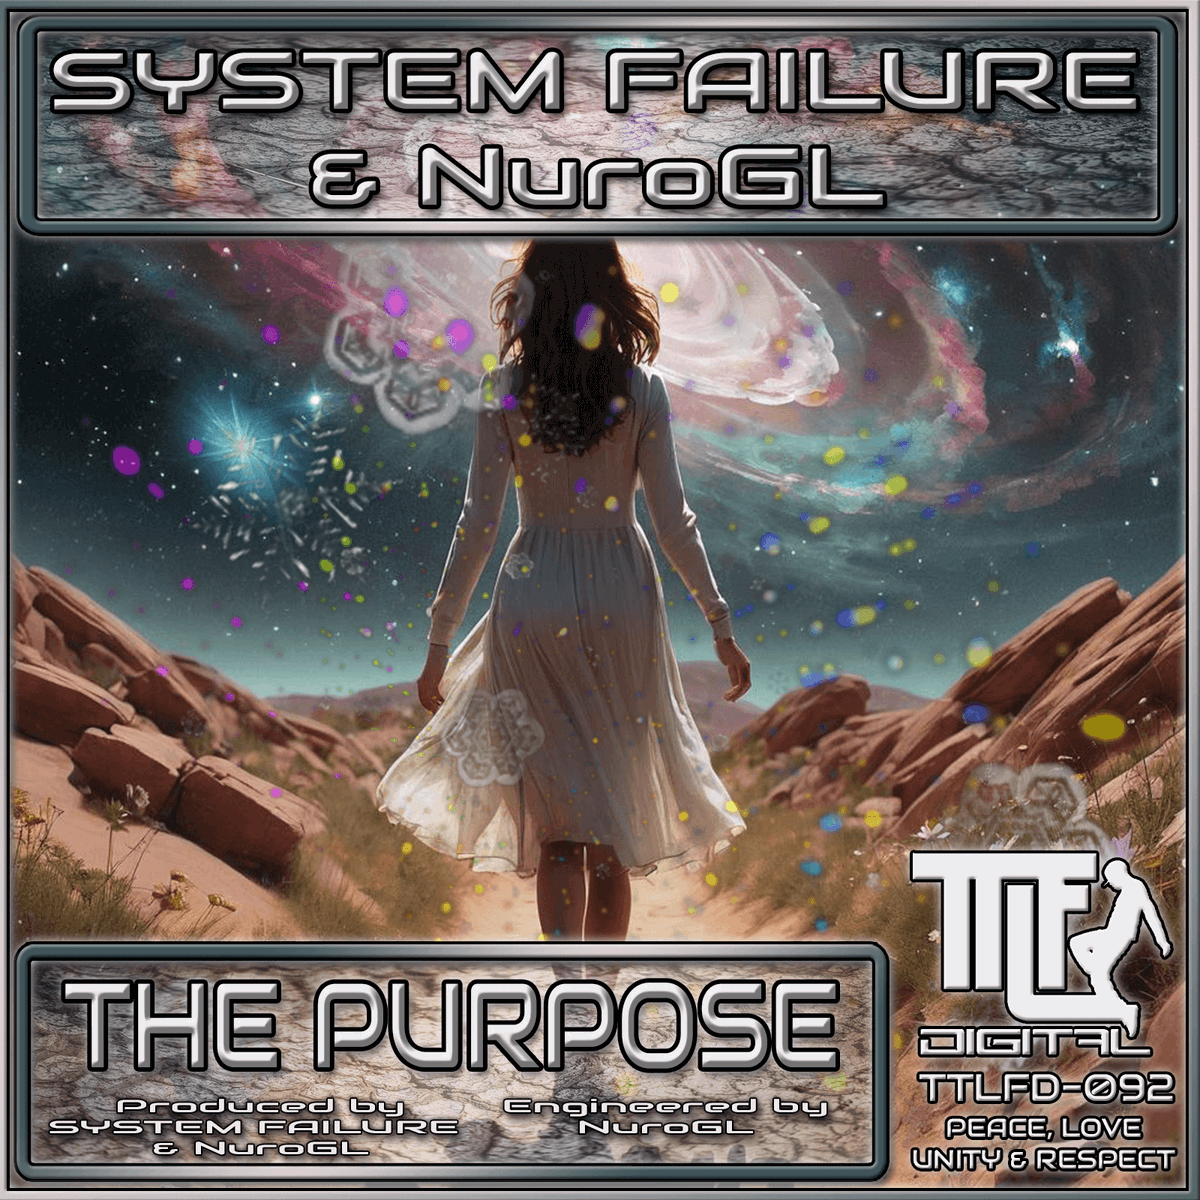 The latest Trip The Light Fantastic release 'The Purpose' from System Failure and NUROGL is out now.

Check it out along with the other releases here:
bit.ly/thepurposetrip…

#hardhouse #harddance #toolboxdigital #newrelease #tripthelightfantastic